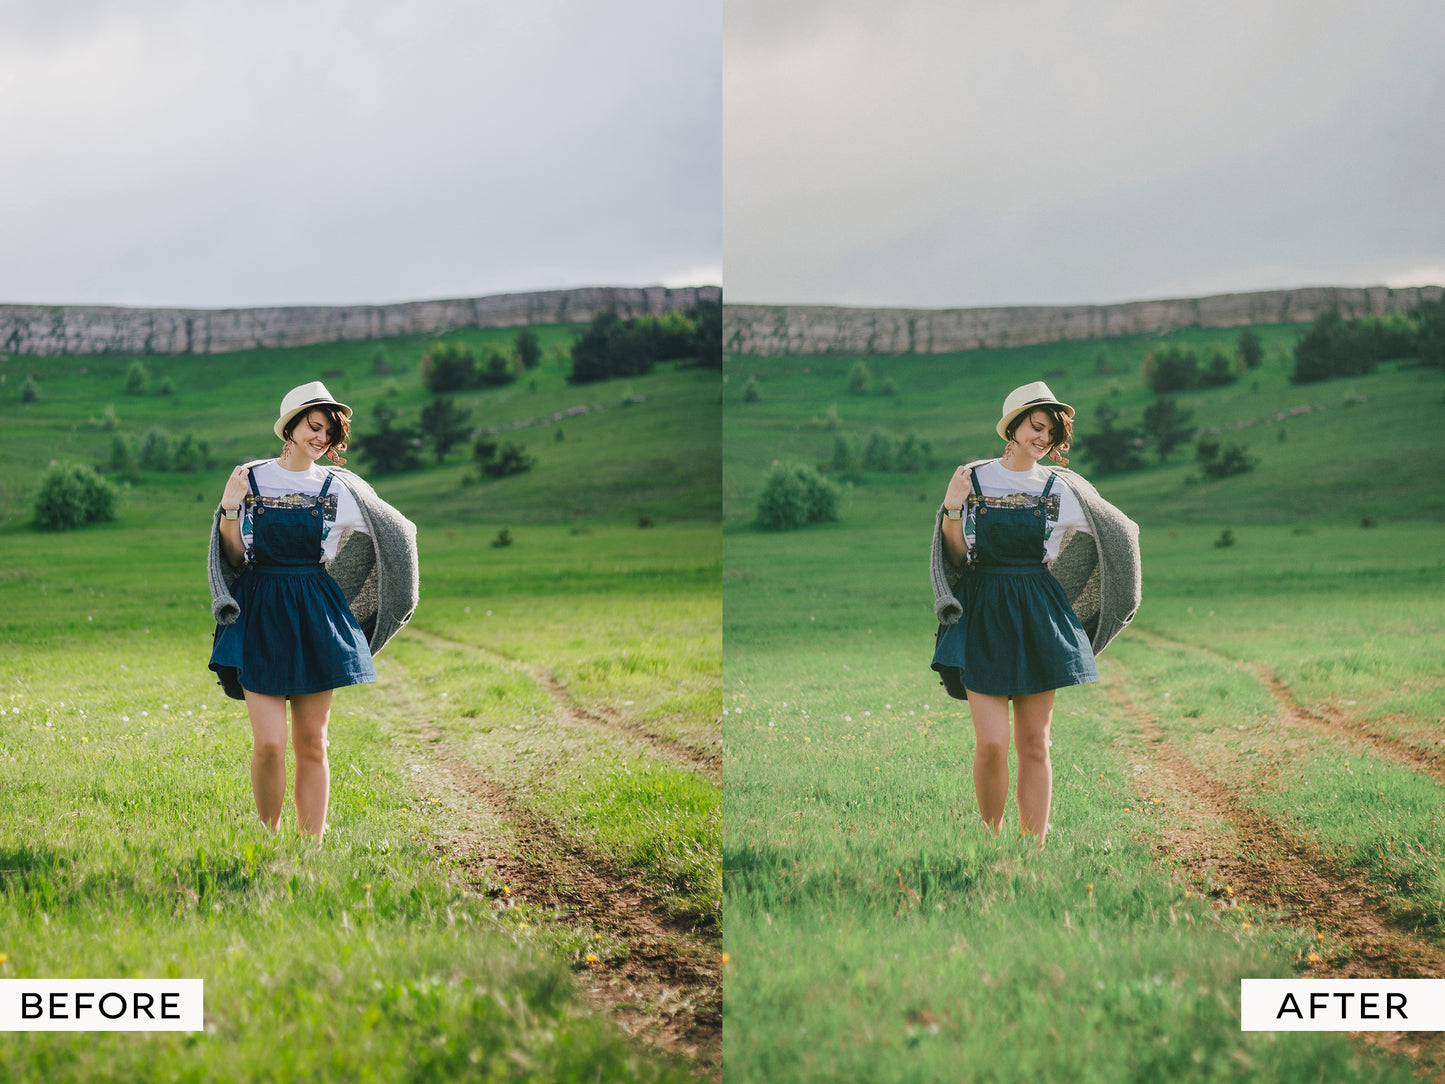 Soft Film Capture One Styles